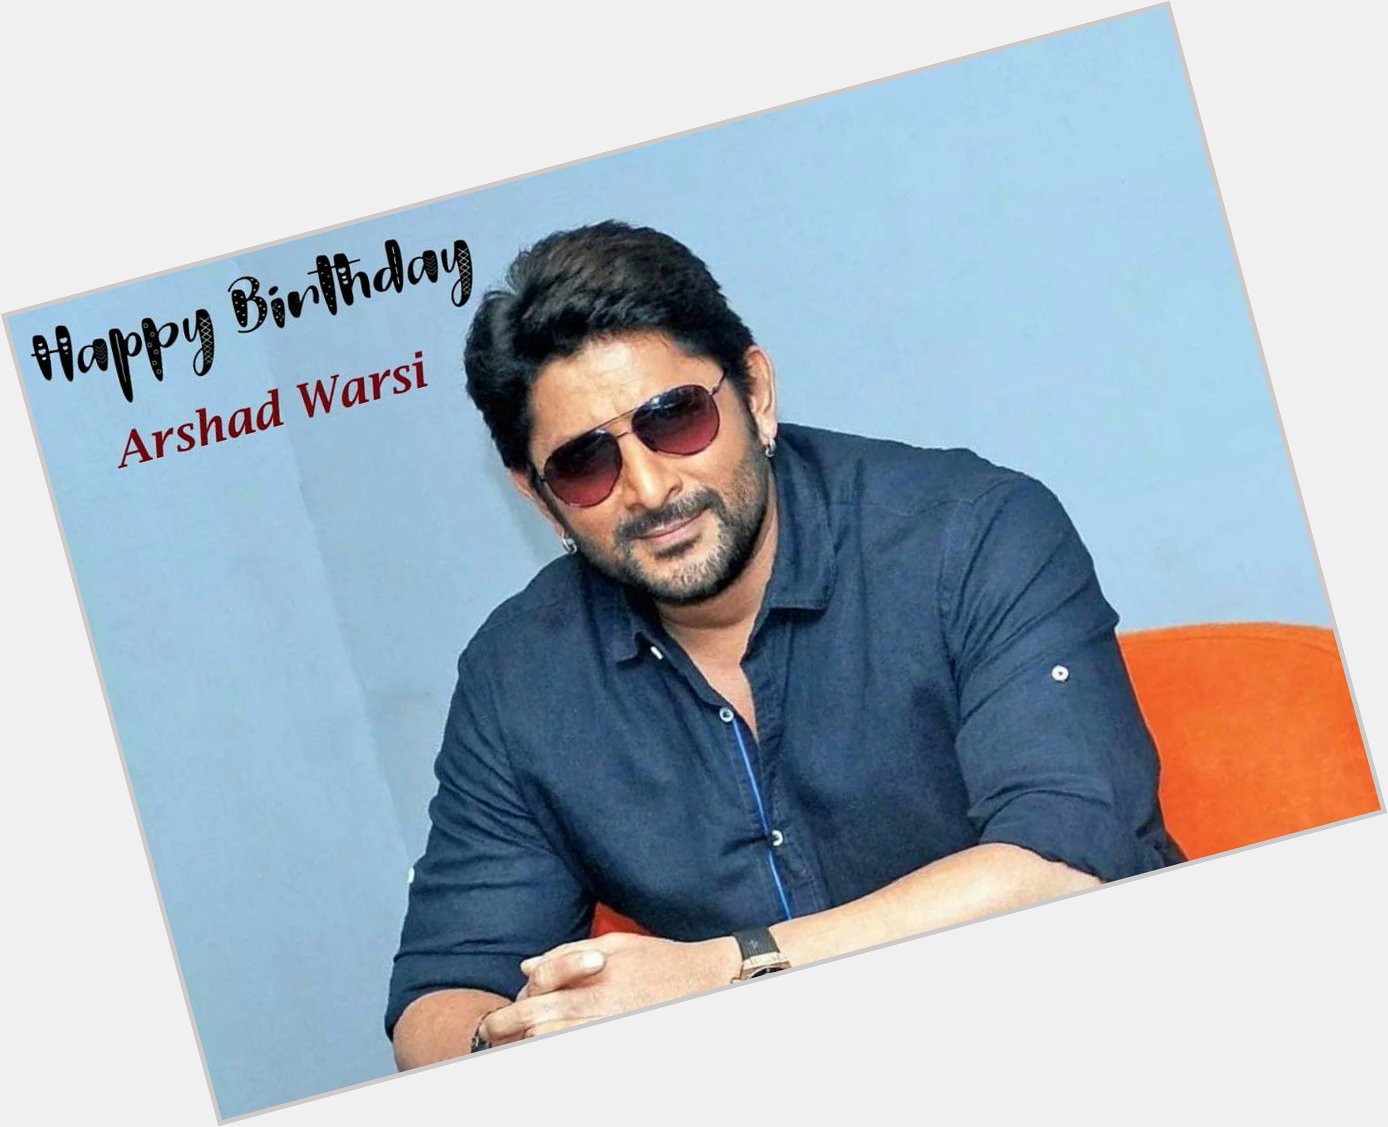 Happy Birthday Arshad Warsi. 
Have a look at some of his famous meme dialogues. 
Swipe for more 